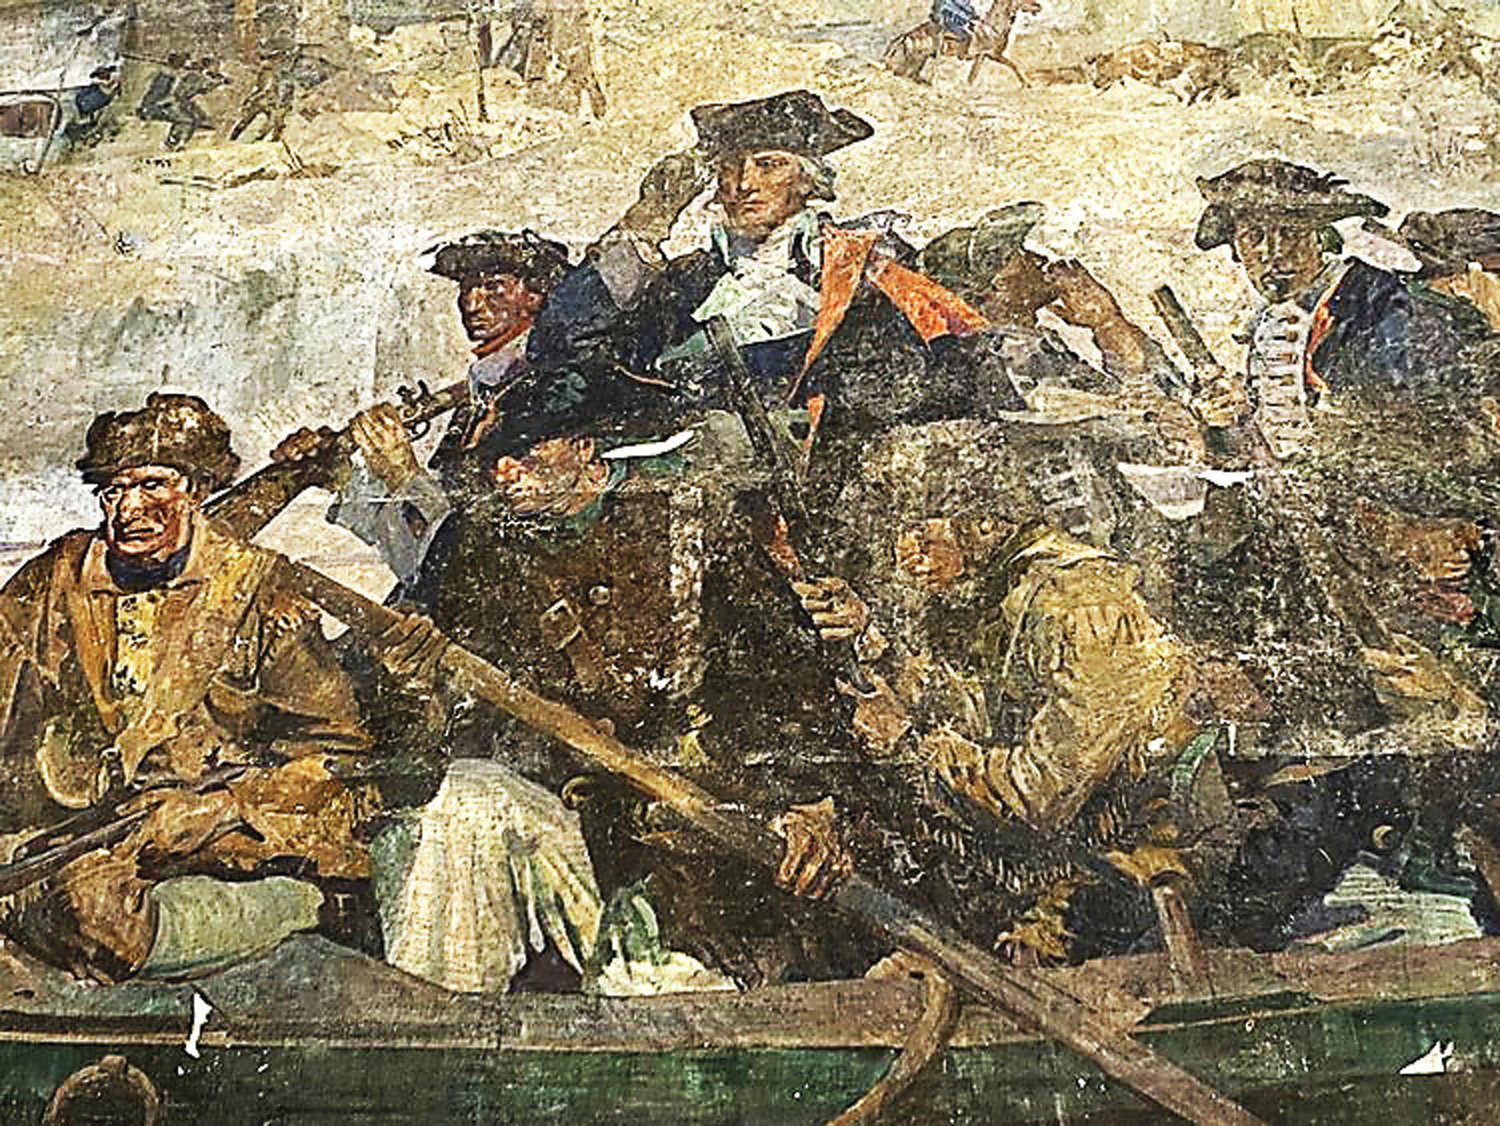 Shown is a detail of a historic mural by American muralist and combat artist George Matthews Hardin, which is being restored  by the volunteer friends group of Washington Crossing State Park in New Jersey. Pat Millen, a founding trustee of the friends group, Washington Crossing Park Association (WCPA), recently discovered this long-forgotten mural.